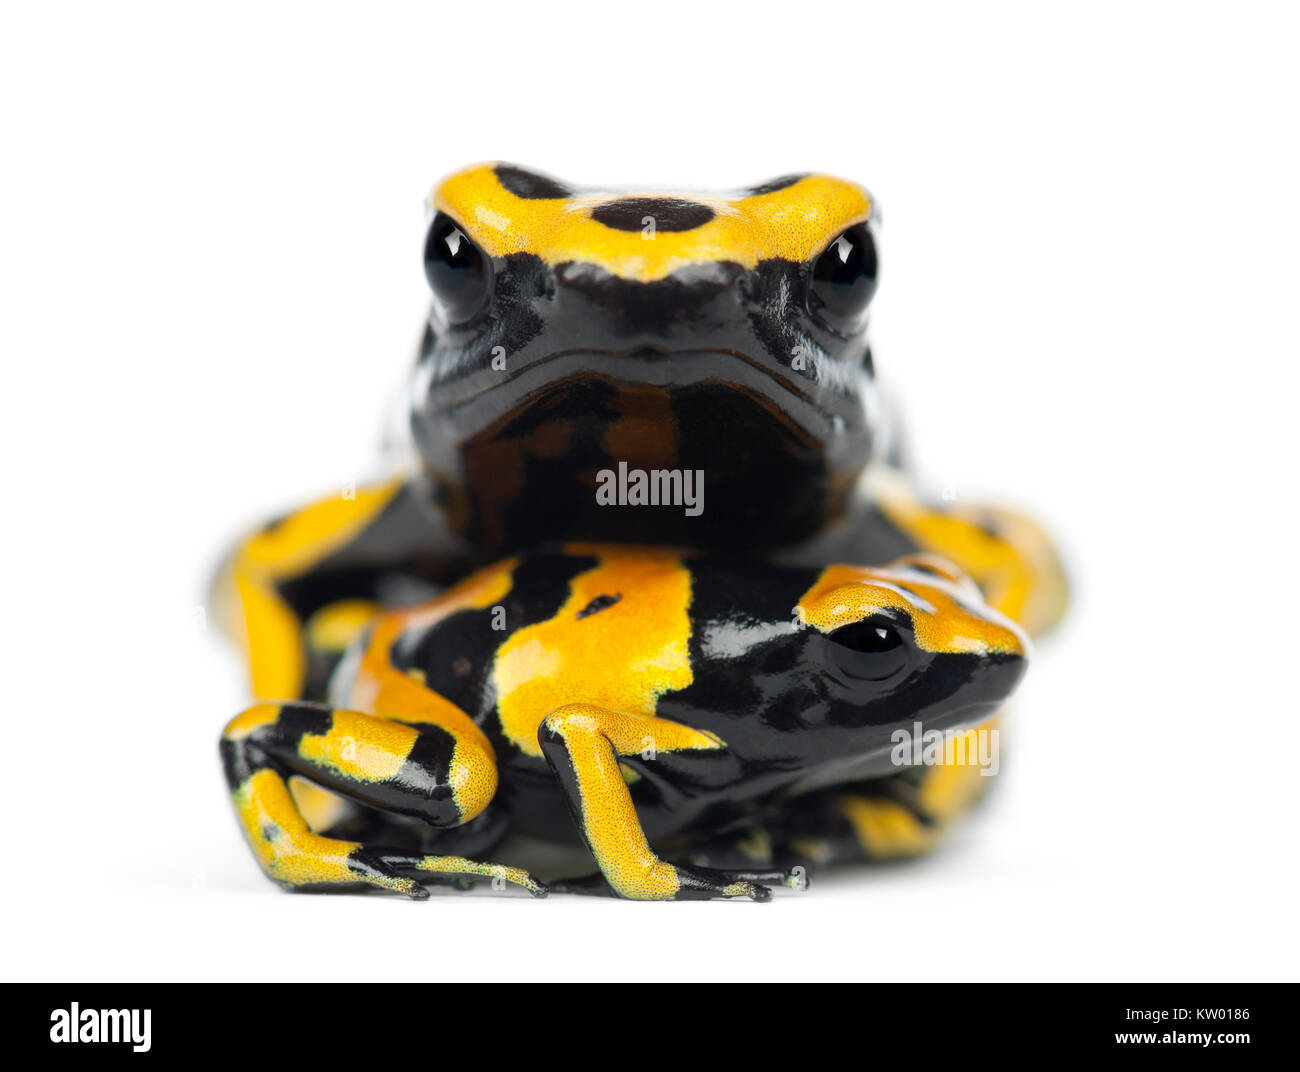 Yellow-Banded Poison Dart Frogs, also known as a Yellow-Headed Poison Dart Frog and Bumblebee Poison Frog, Dendrobates leucomelas, with young, portrai Stock Photo